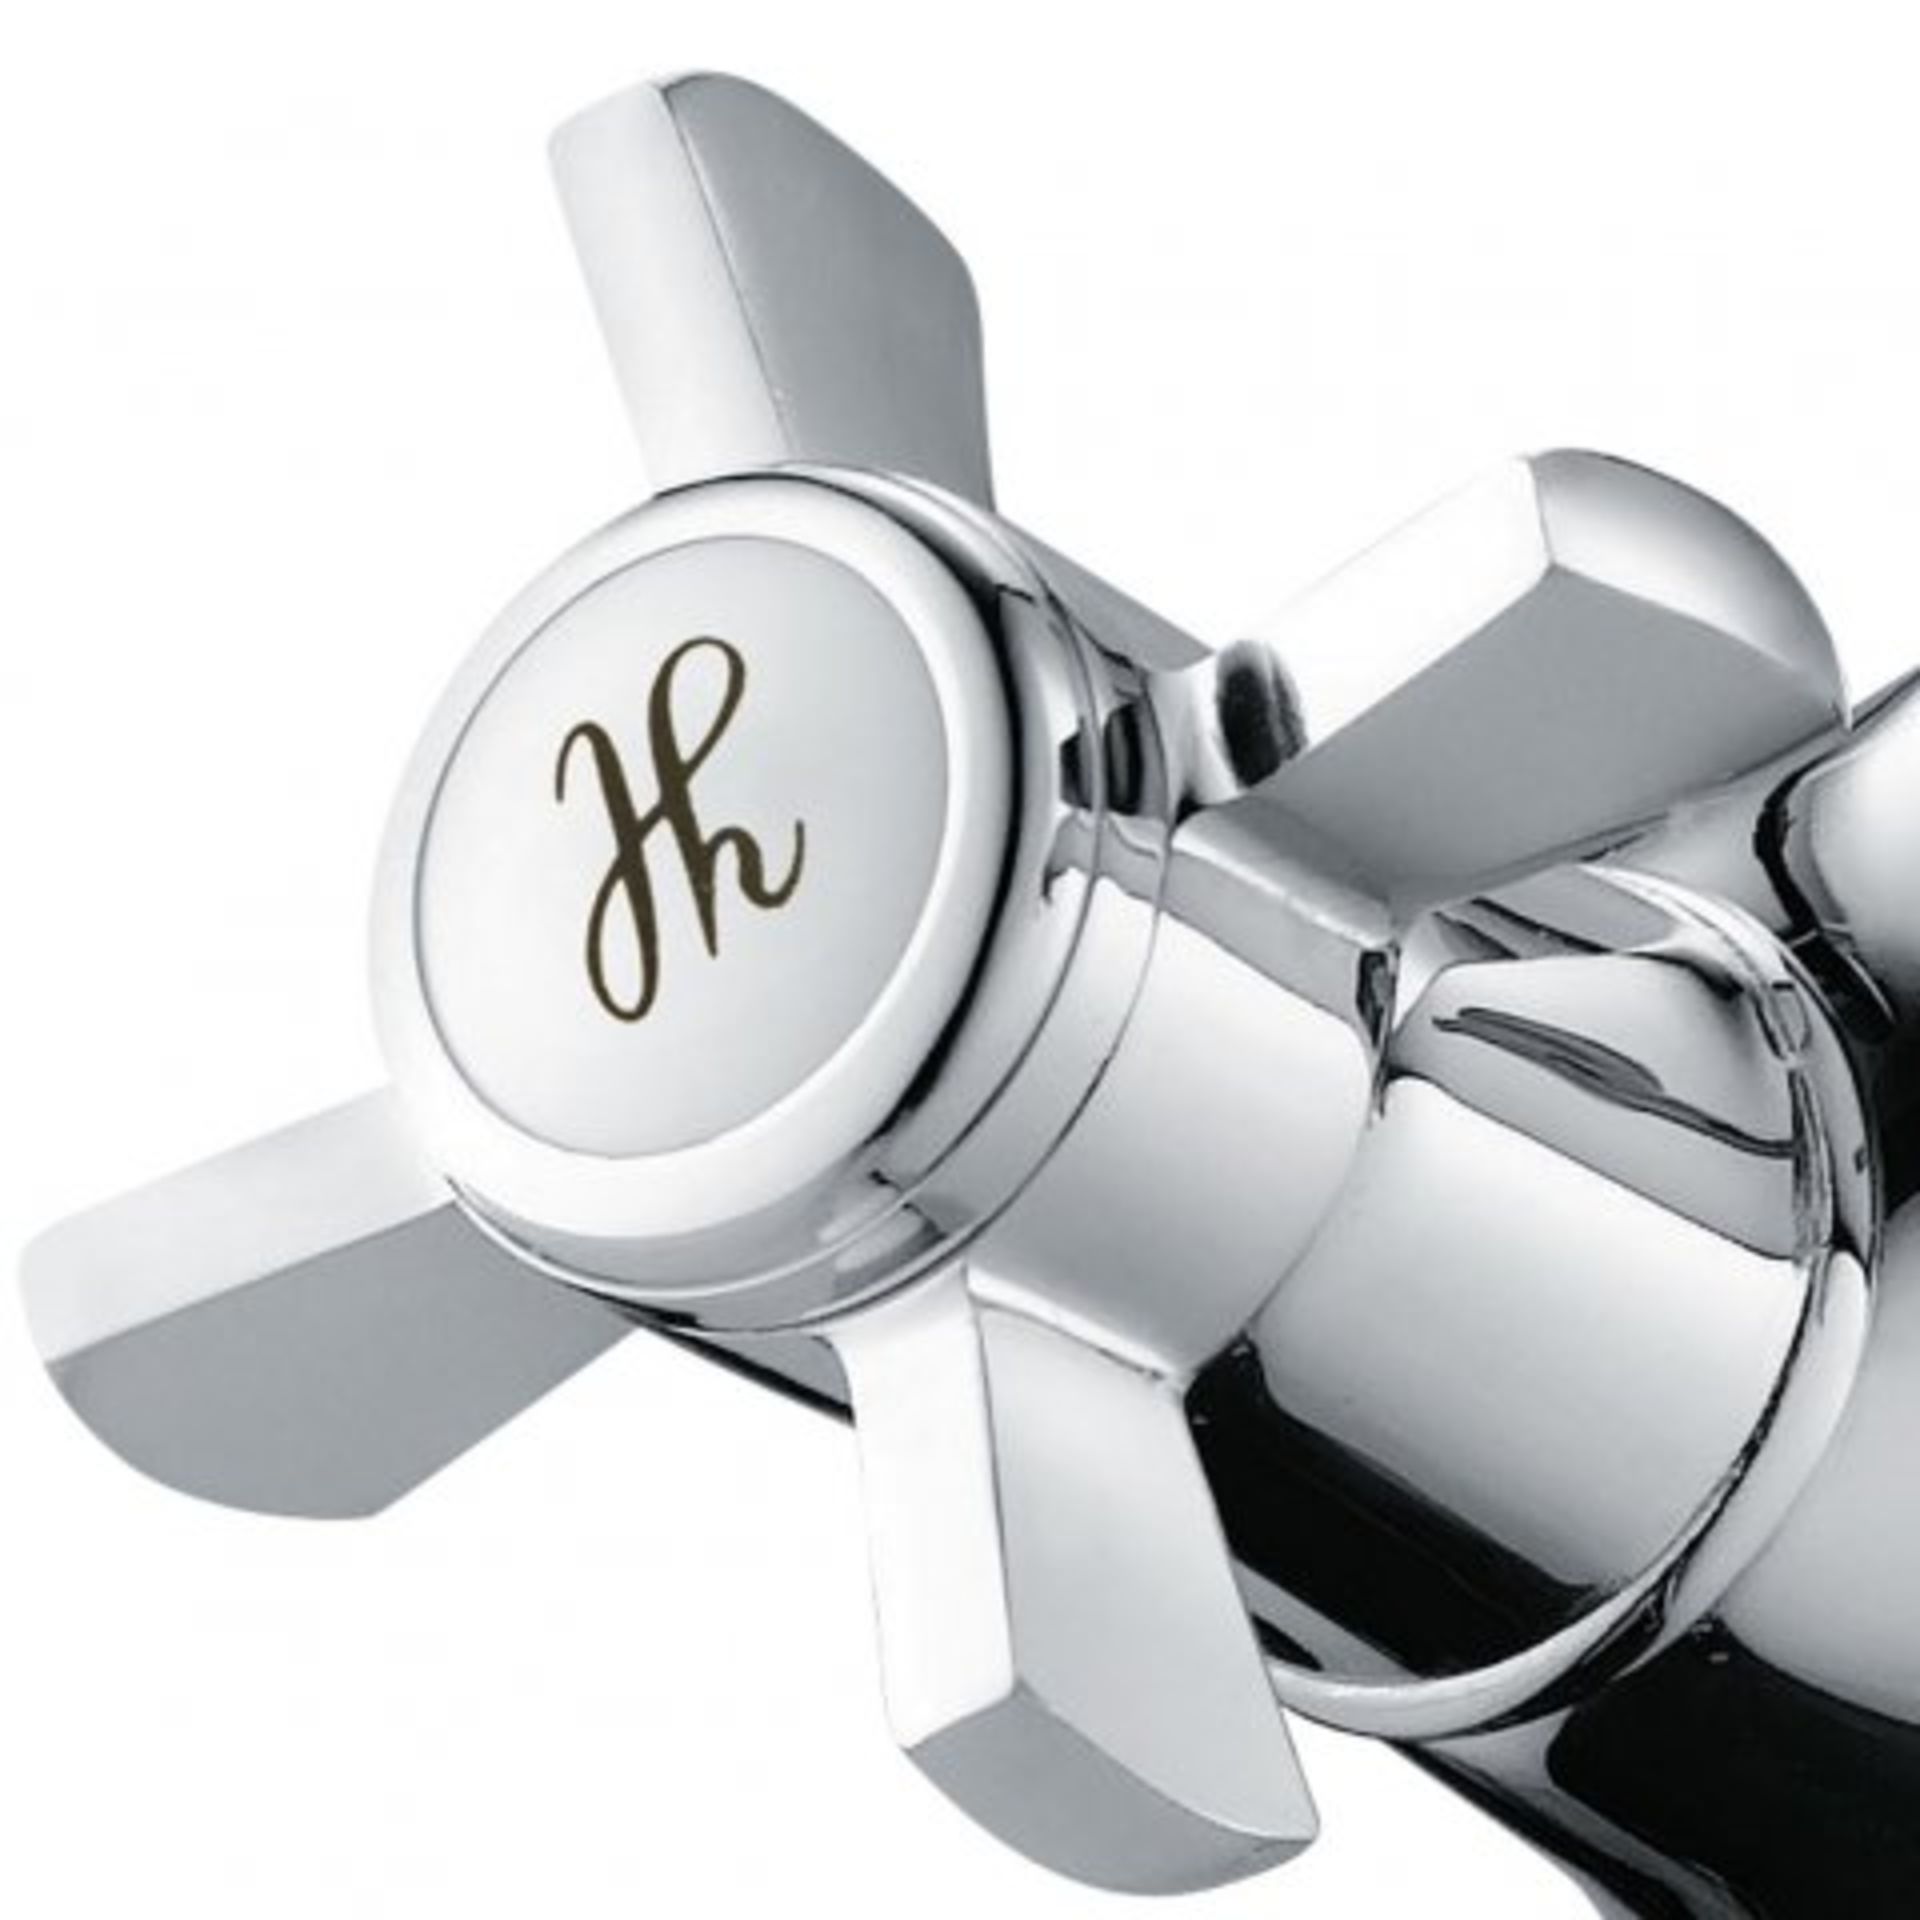 (H38) Cambridge Traditional Basin Mixer Tap Our great range of traditional taps are perfect for - Image 3 of 3